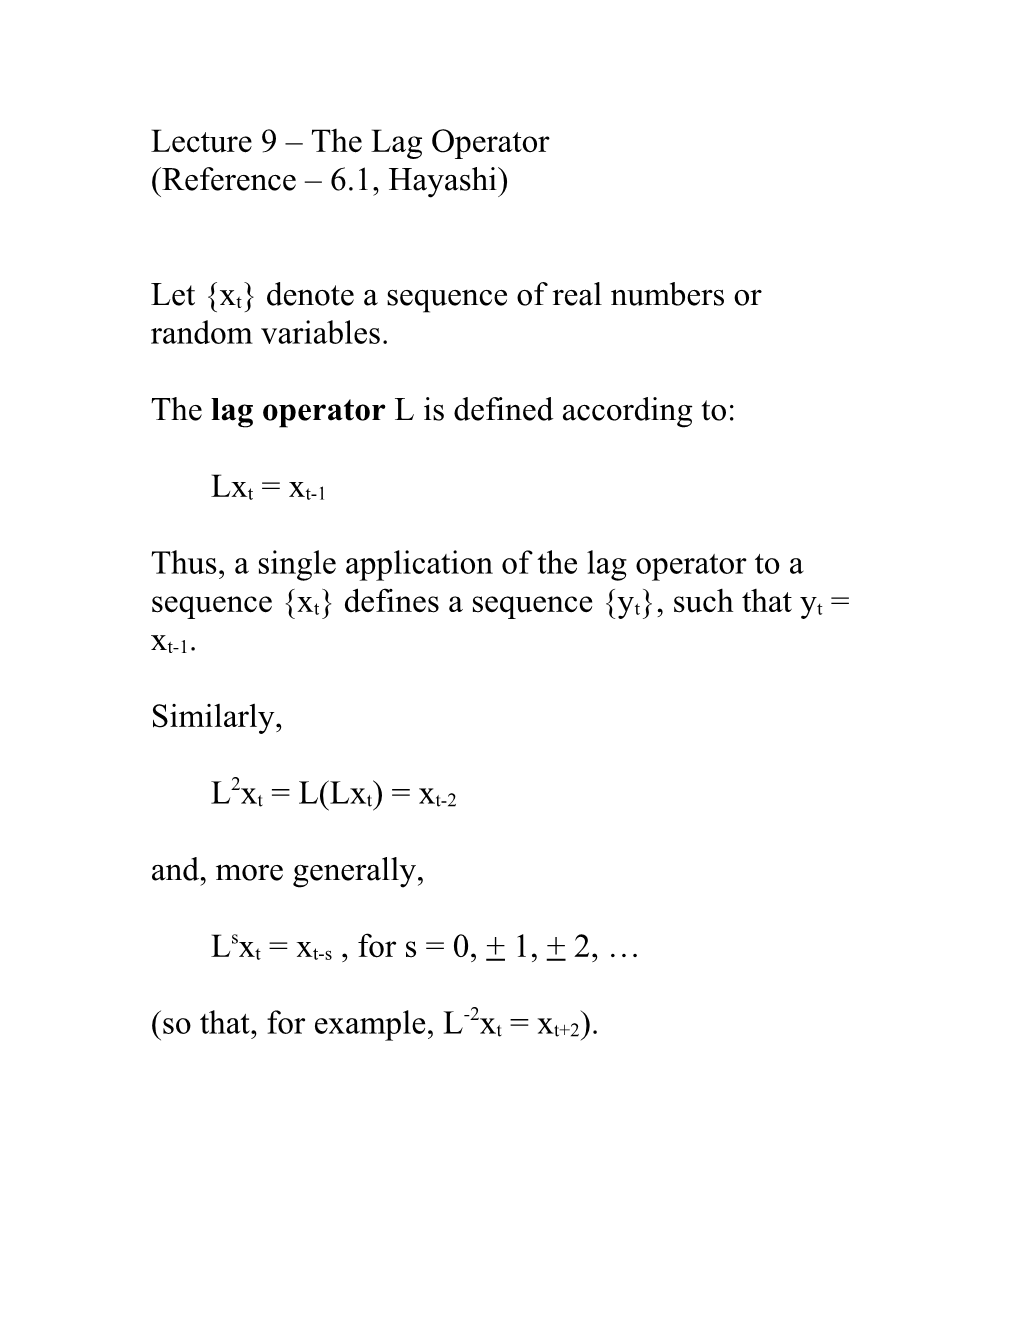 Lecture 9 the Lag Operator